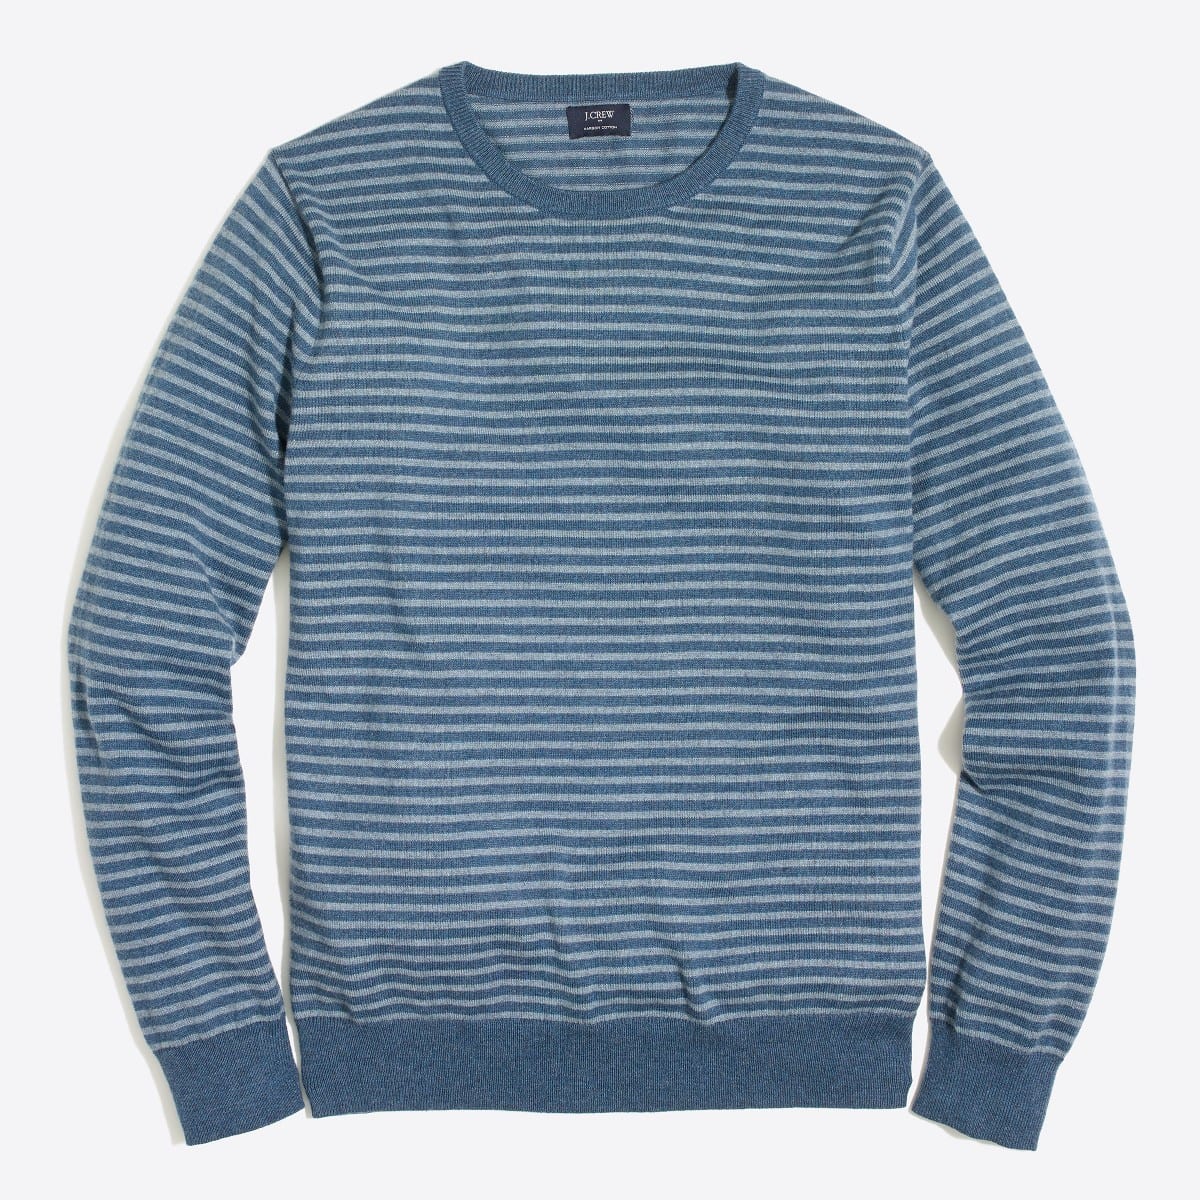 New Mens Sweaters 2017: Striped Crewneck Sweater for Men 2018